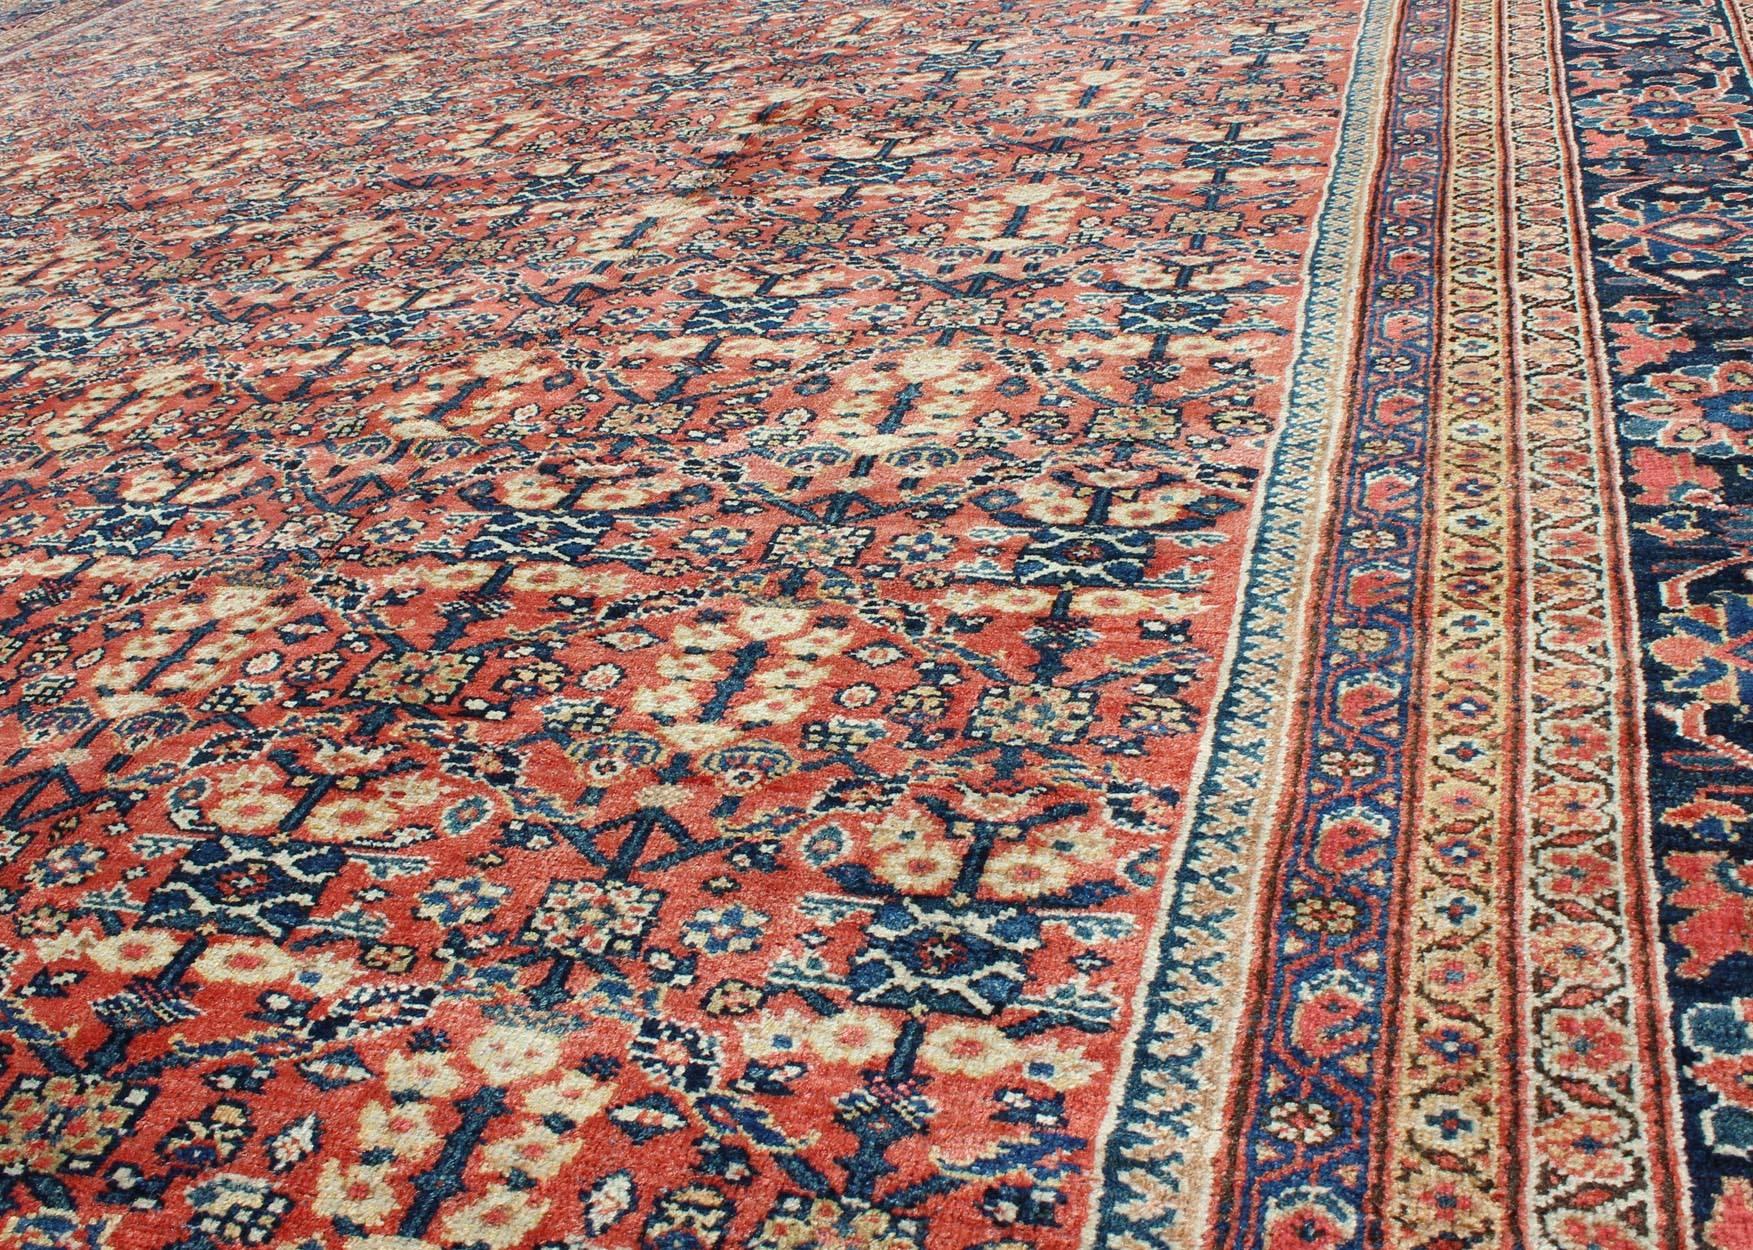 Wool Antique Persian Sultanabad Rug with All Over Design in Rust Red, Blue and Cream